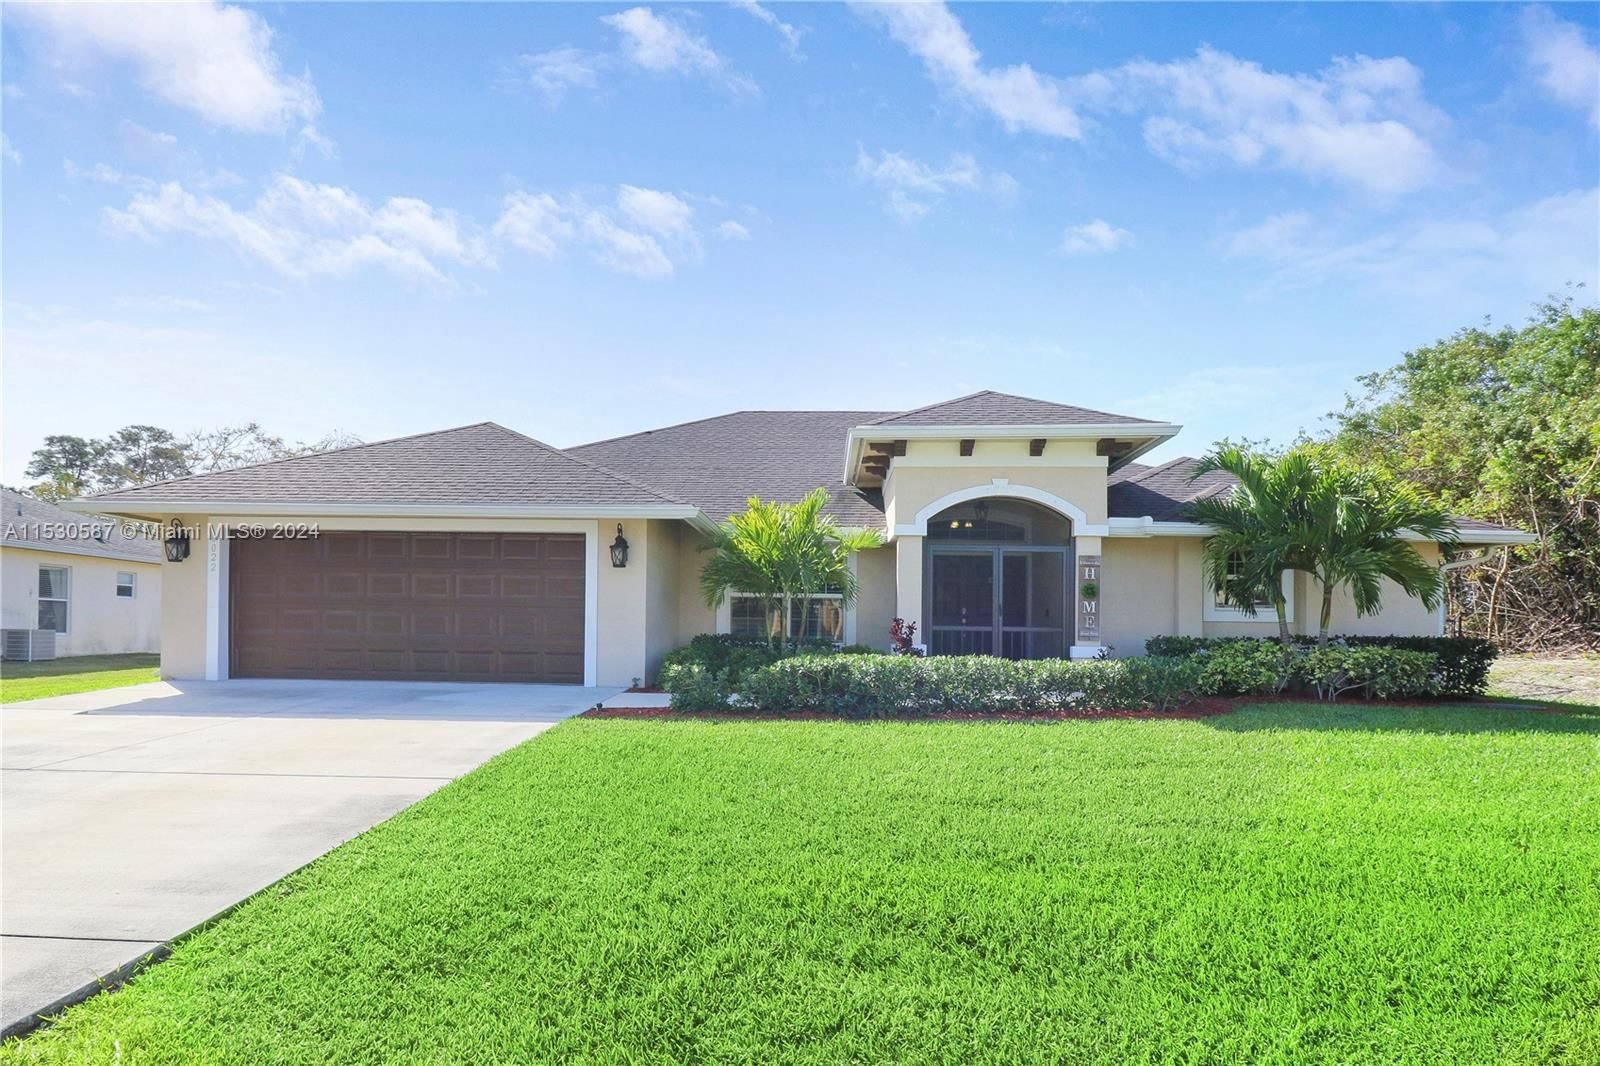 Real estate property located at 6022 Wolverine Rd, St Lucie County, PORT ST LUCIE SECTION 44, Port St. Lucie, FL